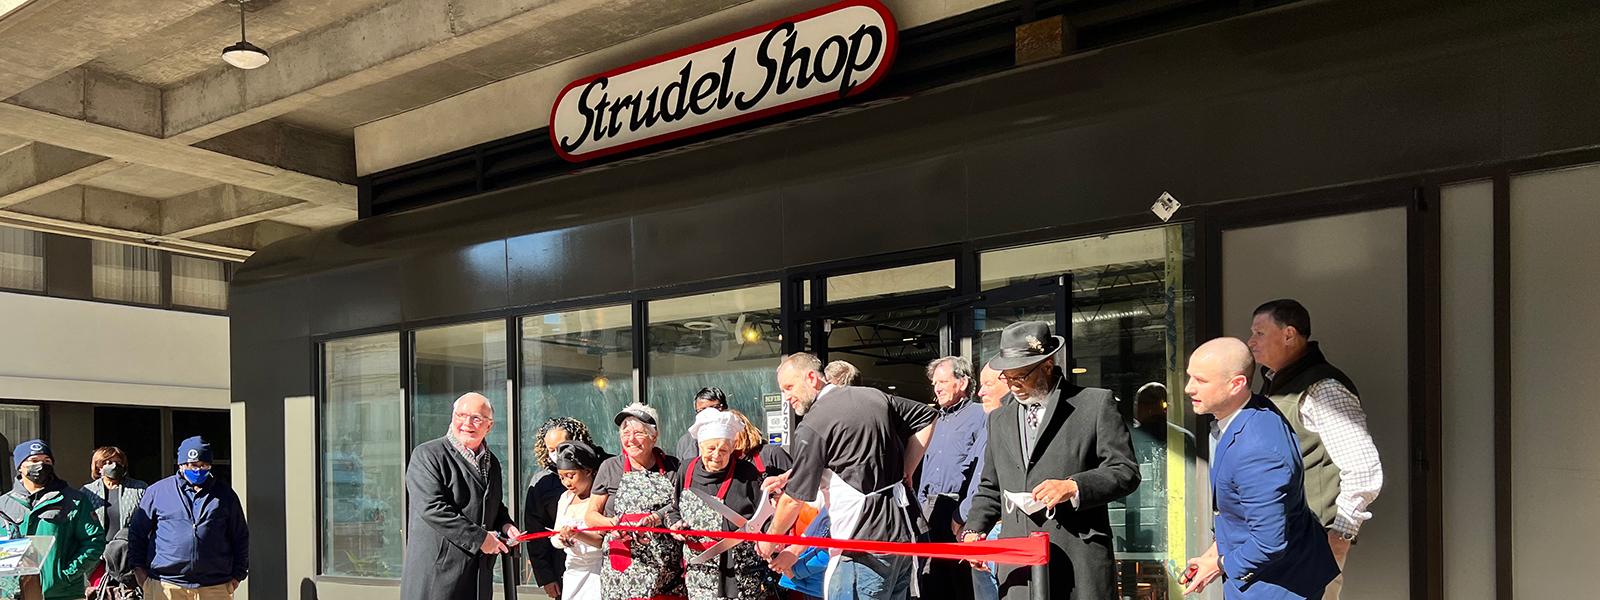 Cutting the ribbon on the opening of the Strudel Shop. (Photo by Meera Bhonsle, Cola Daily)